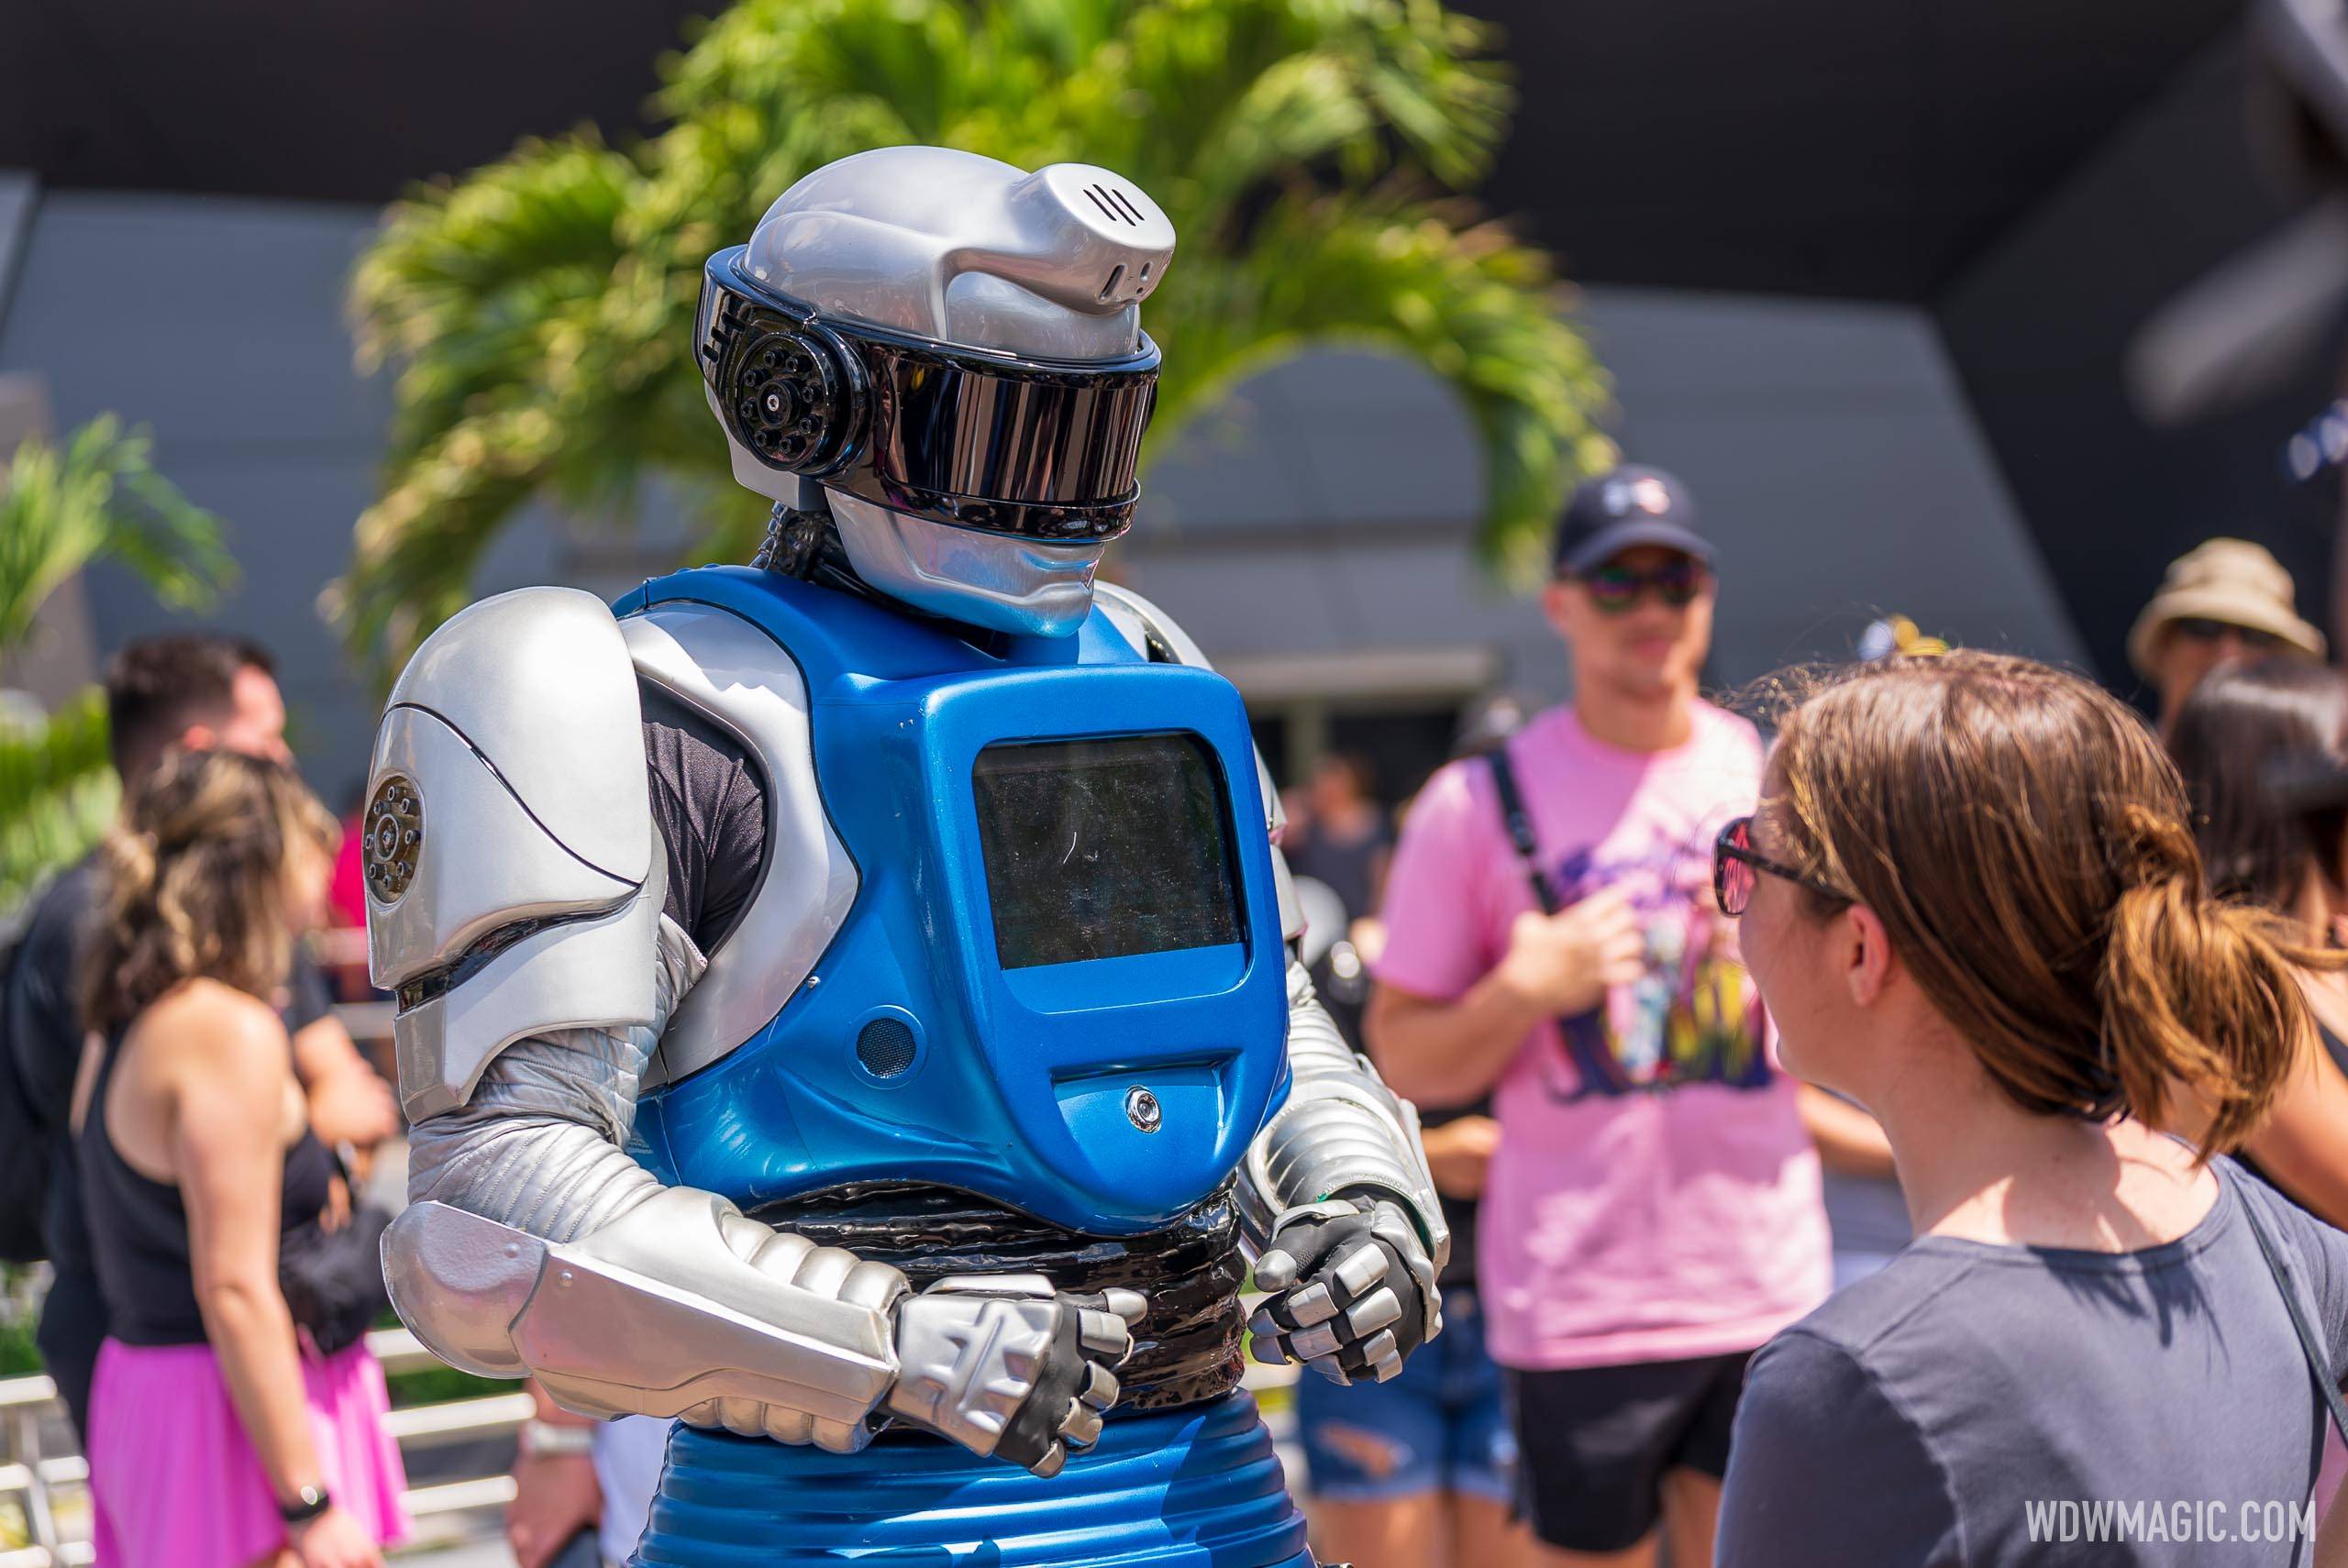 iCan Showbot at EPCOT World Discovery